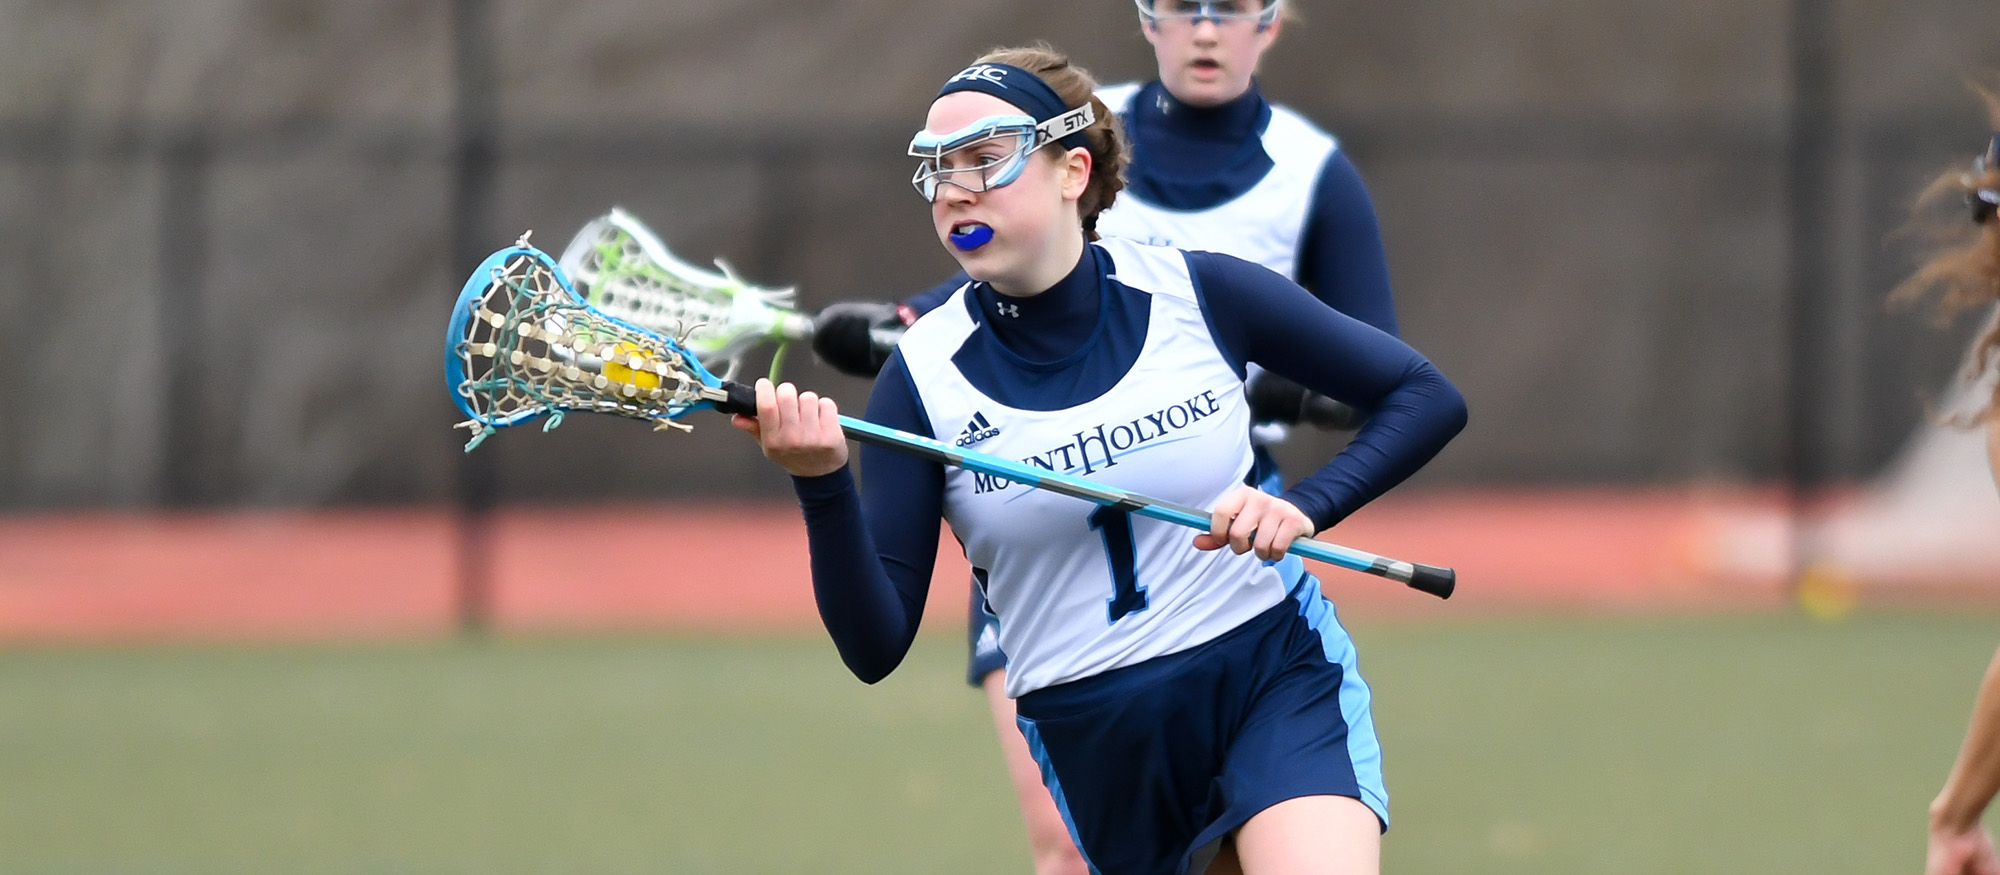 Action photo of Lyons lacrosse player, Meryl Phair.